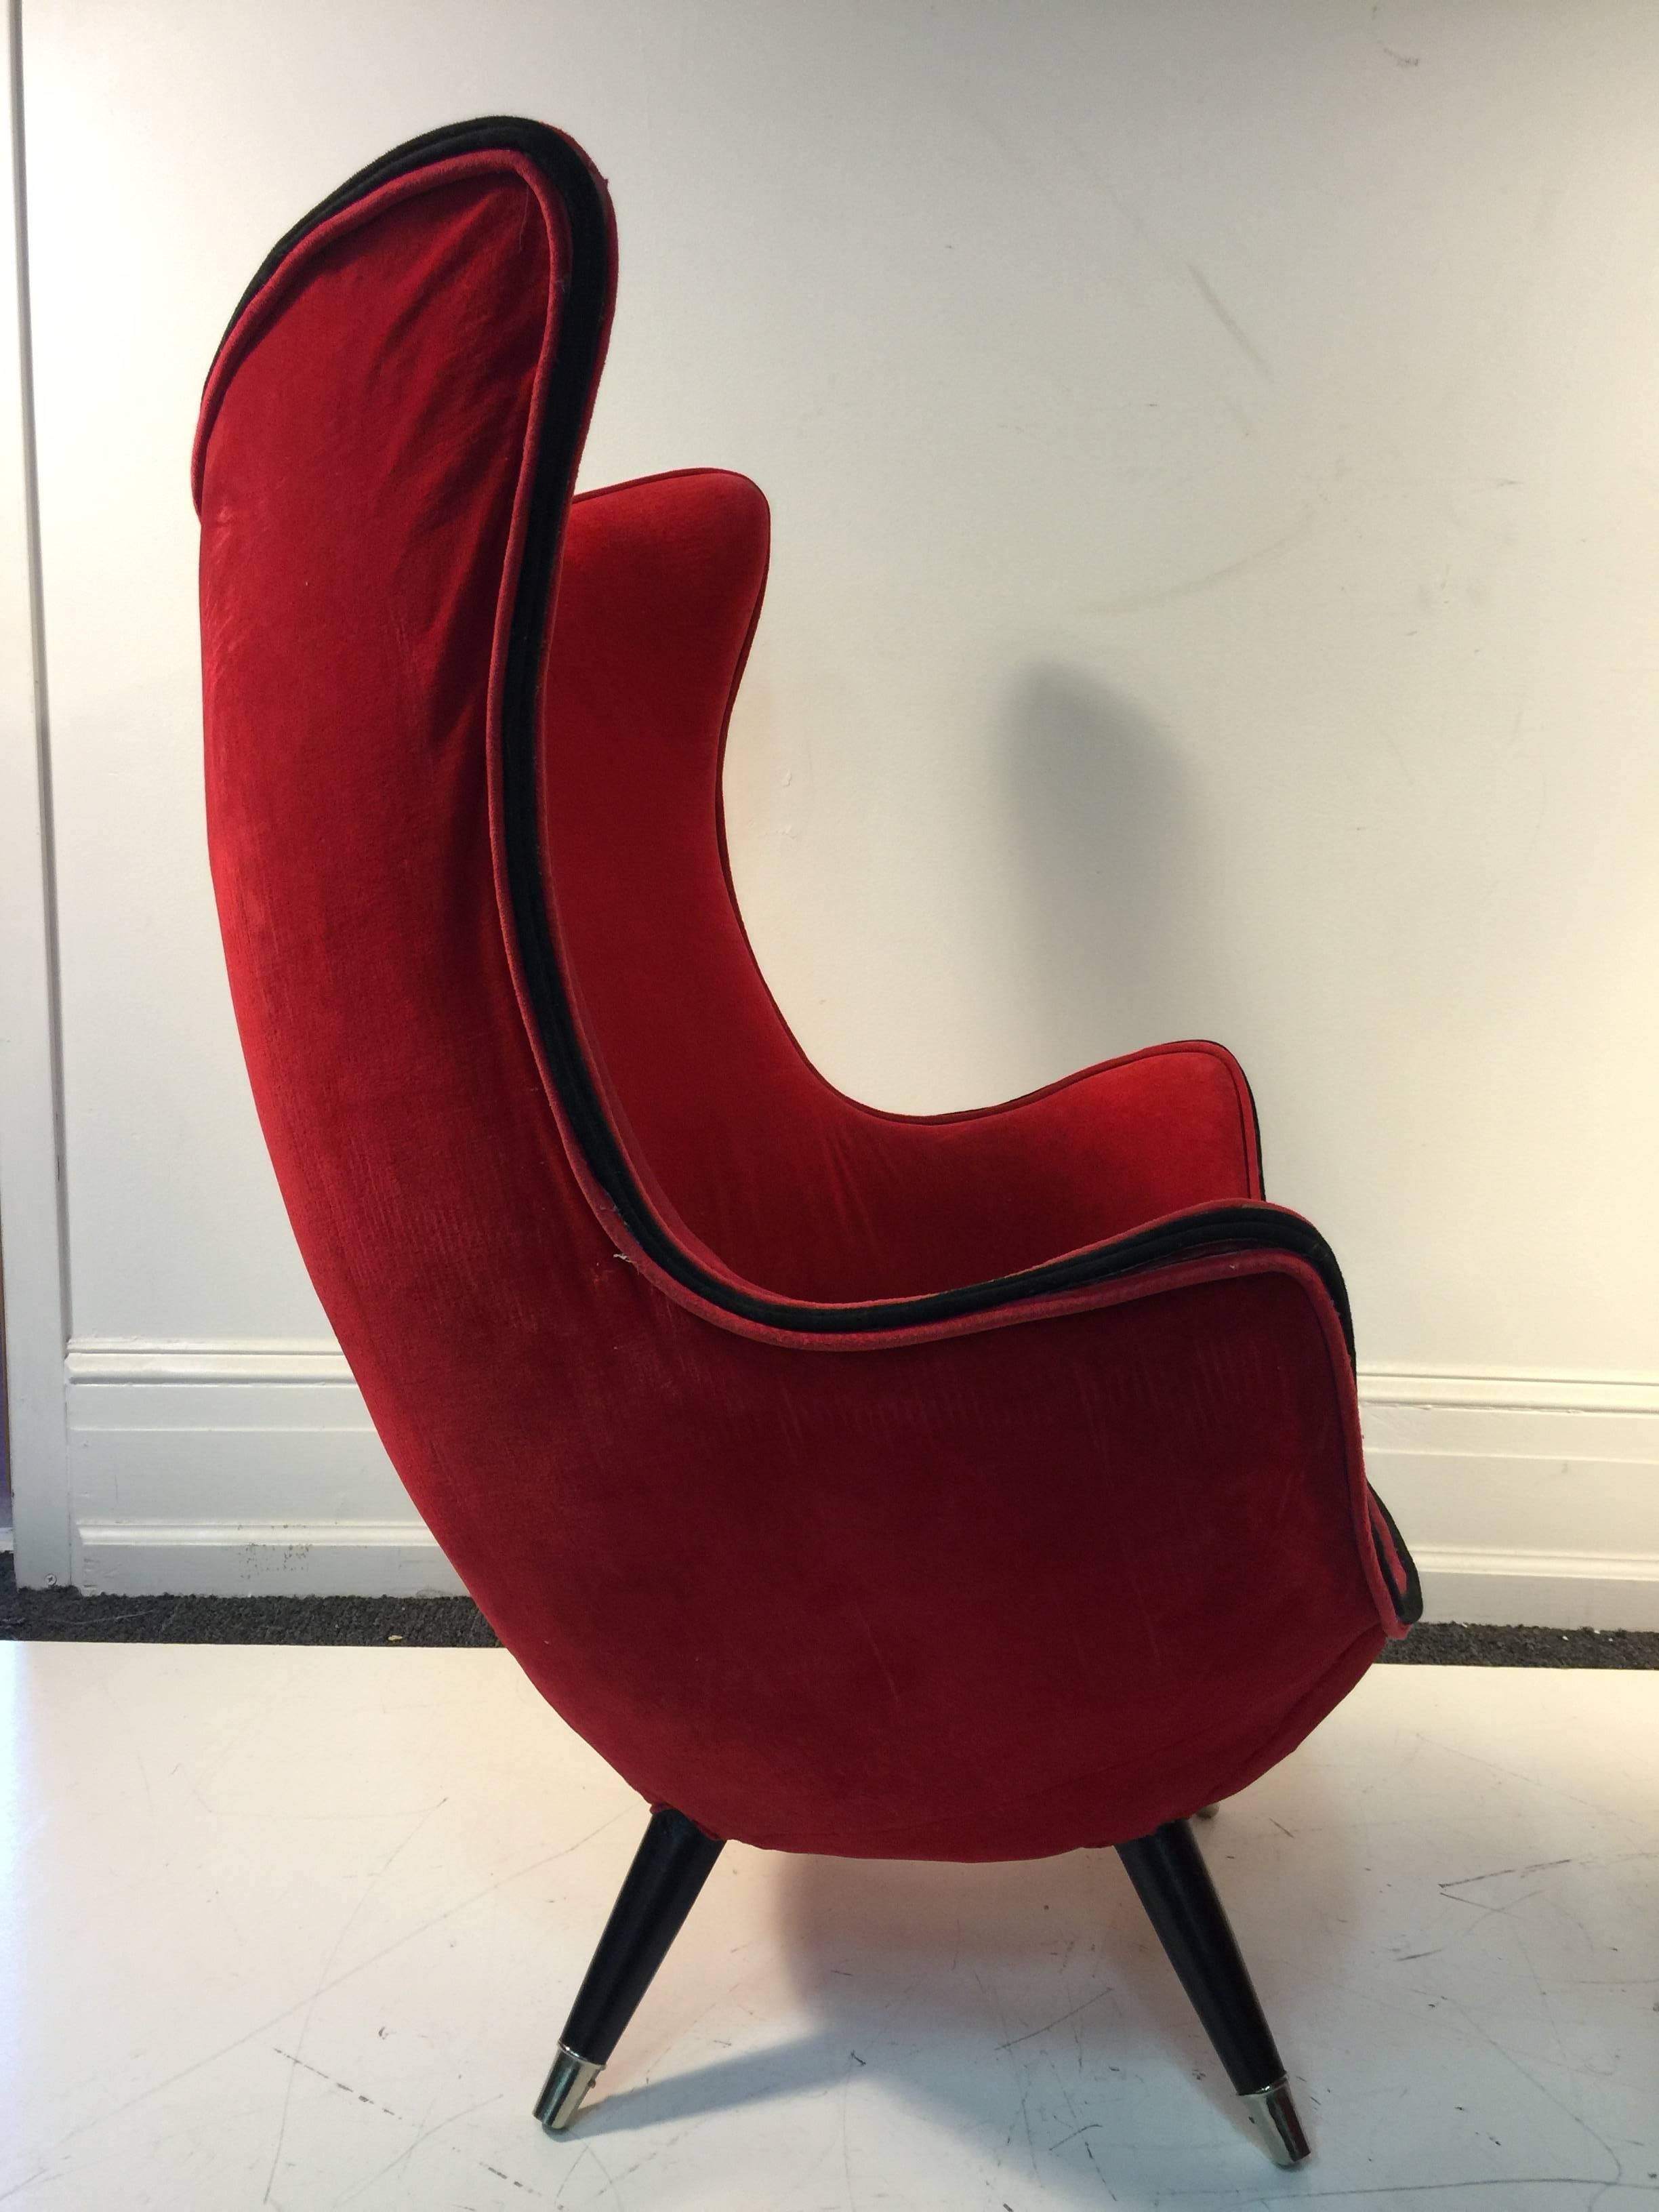  Exceptional Pair of Modernist Red/Black Lounge Chairs Atrributed to Jean Royere In Excellent Condition For Sale In Mount Penn, PA